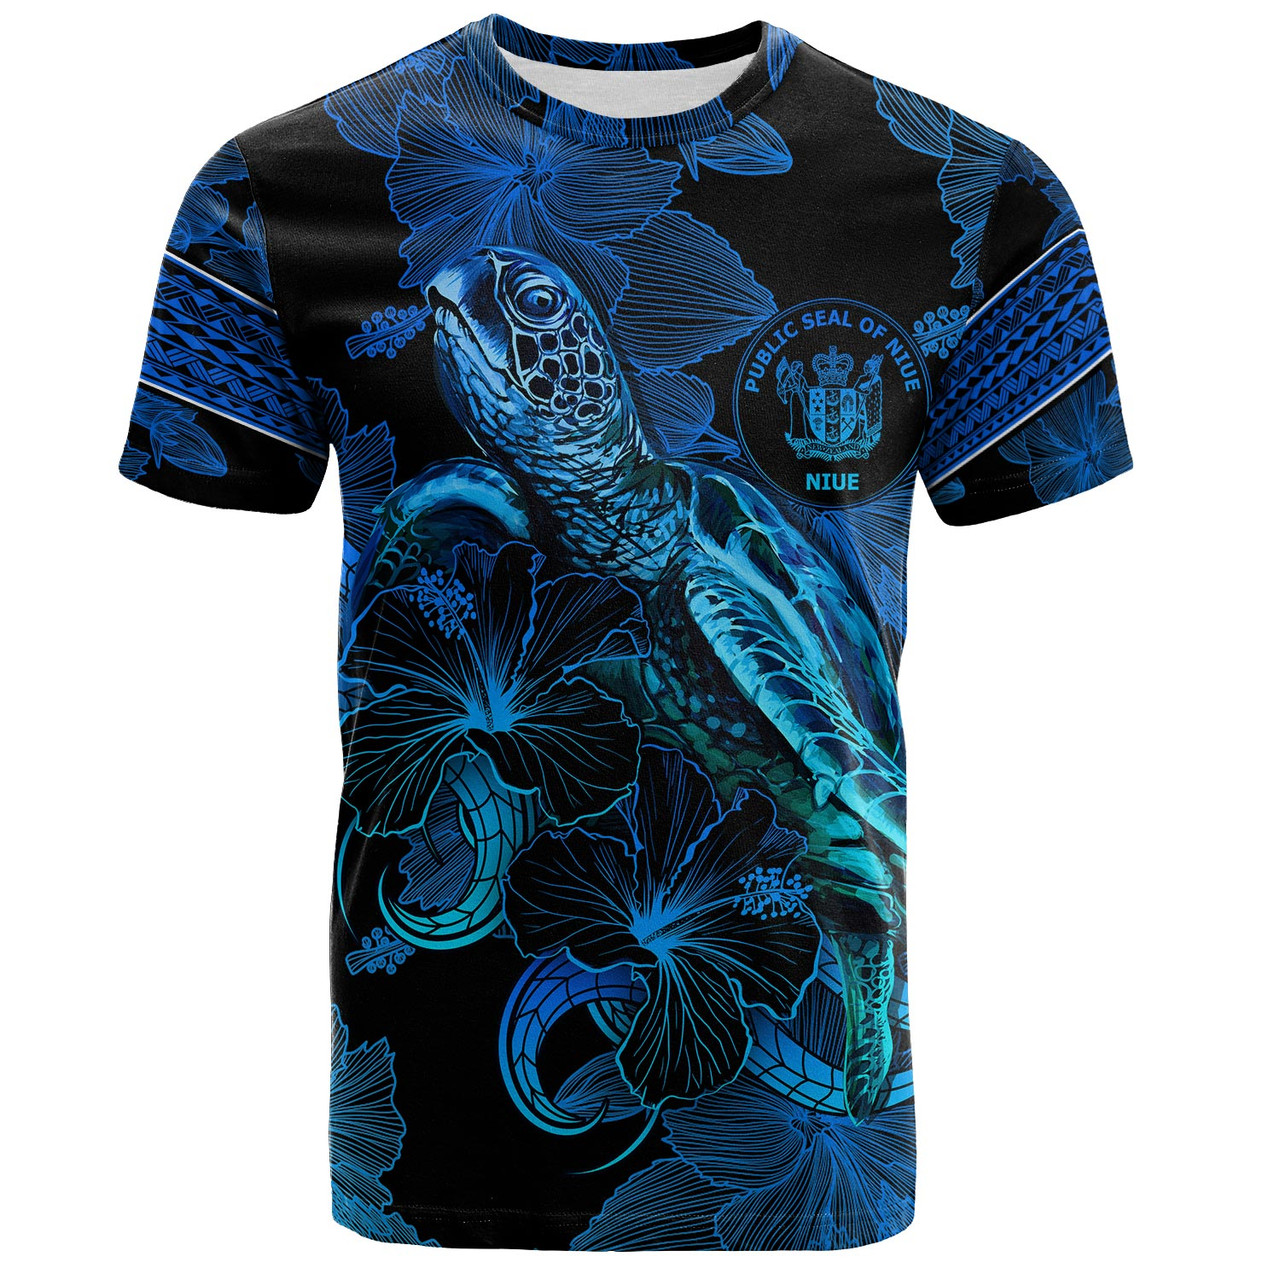 Niue T-Shirt Sea Turtle With Blooming Hibiscus Flowers Tribal Blue